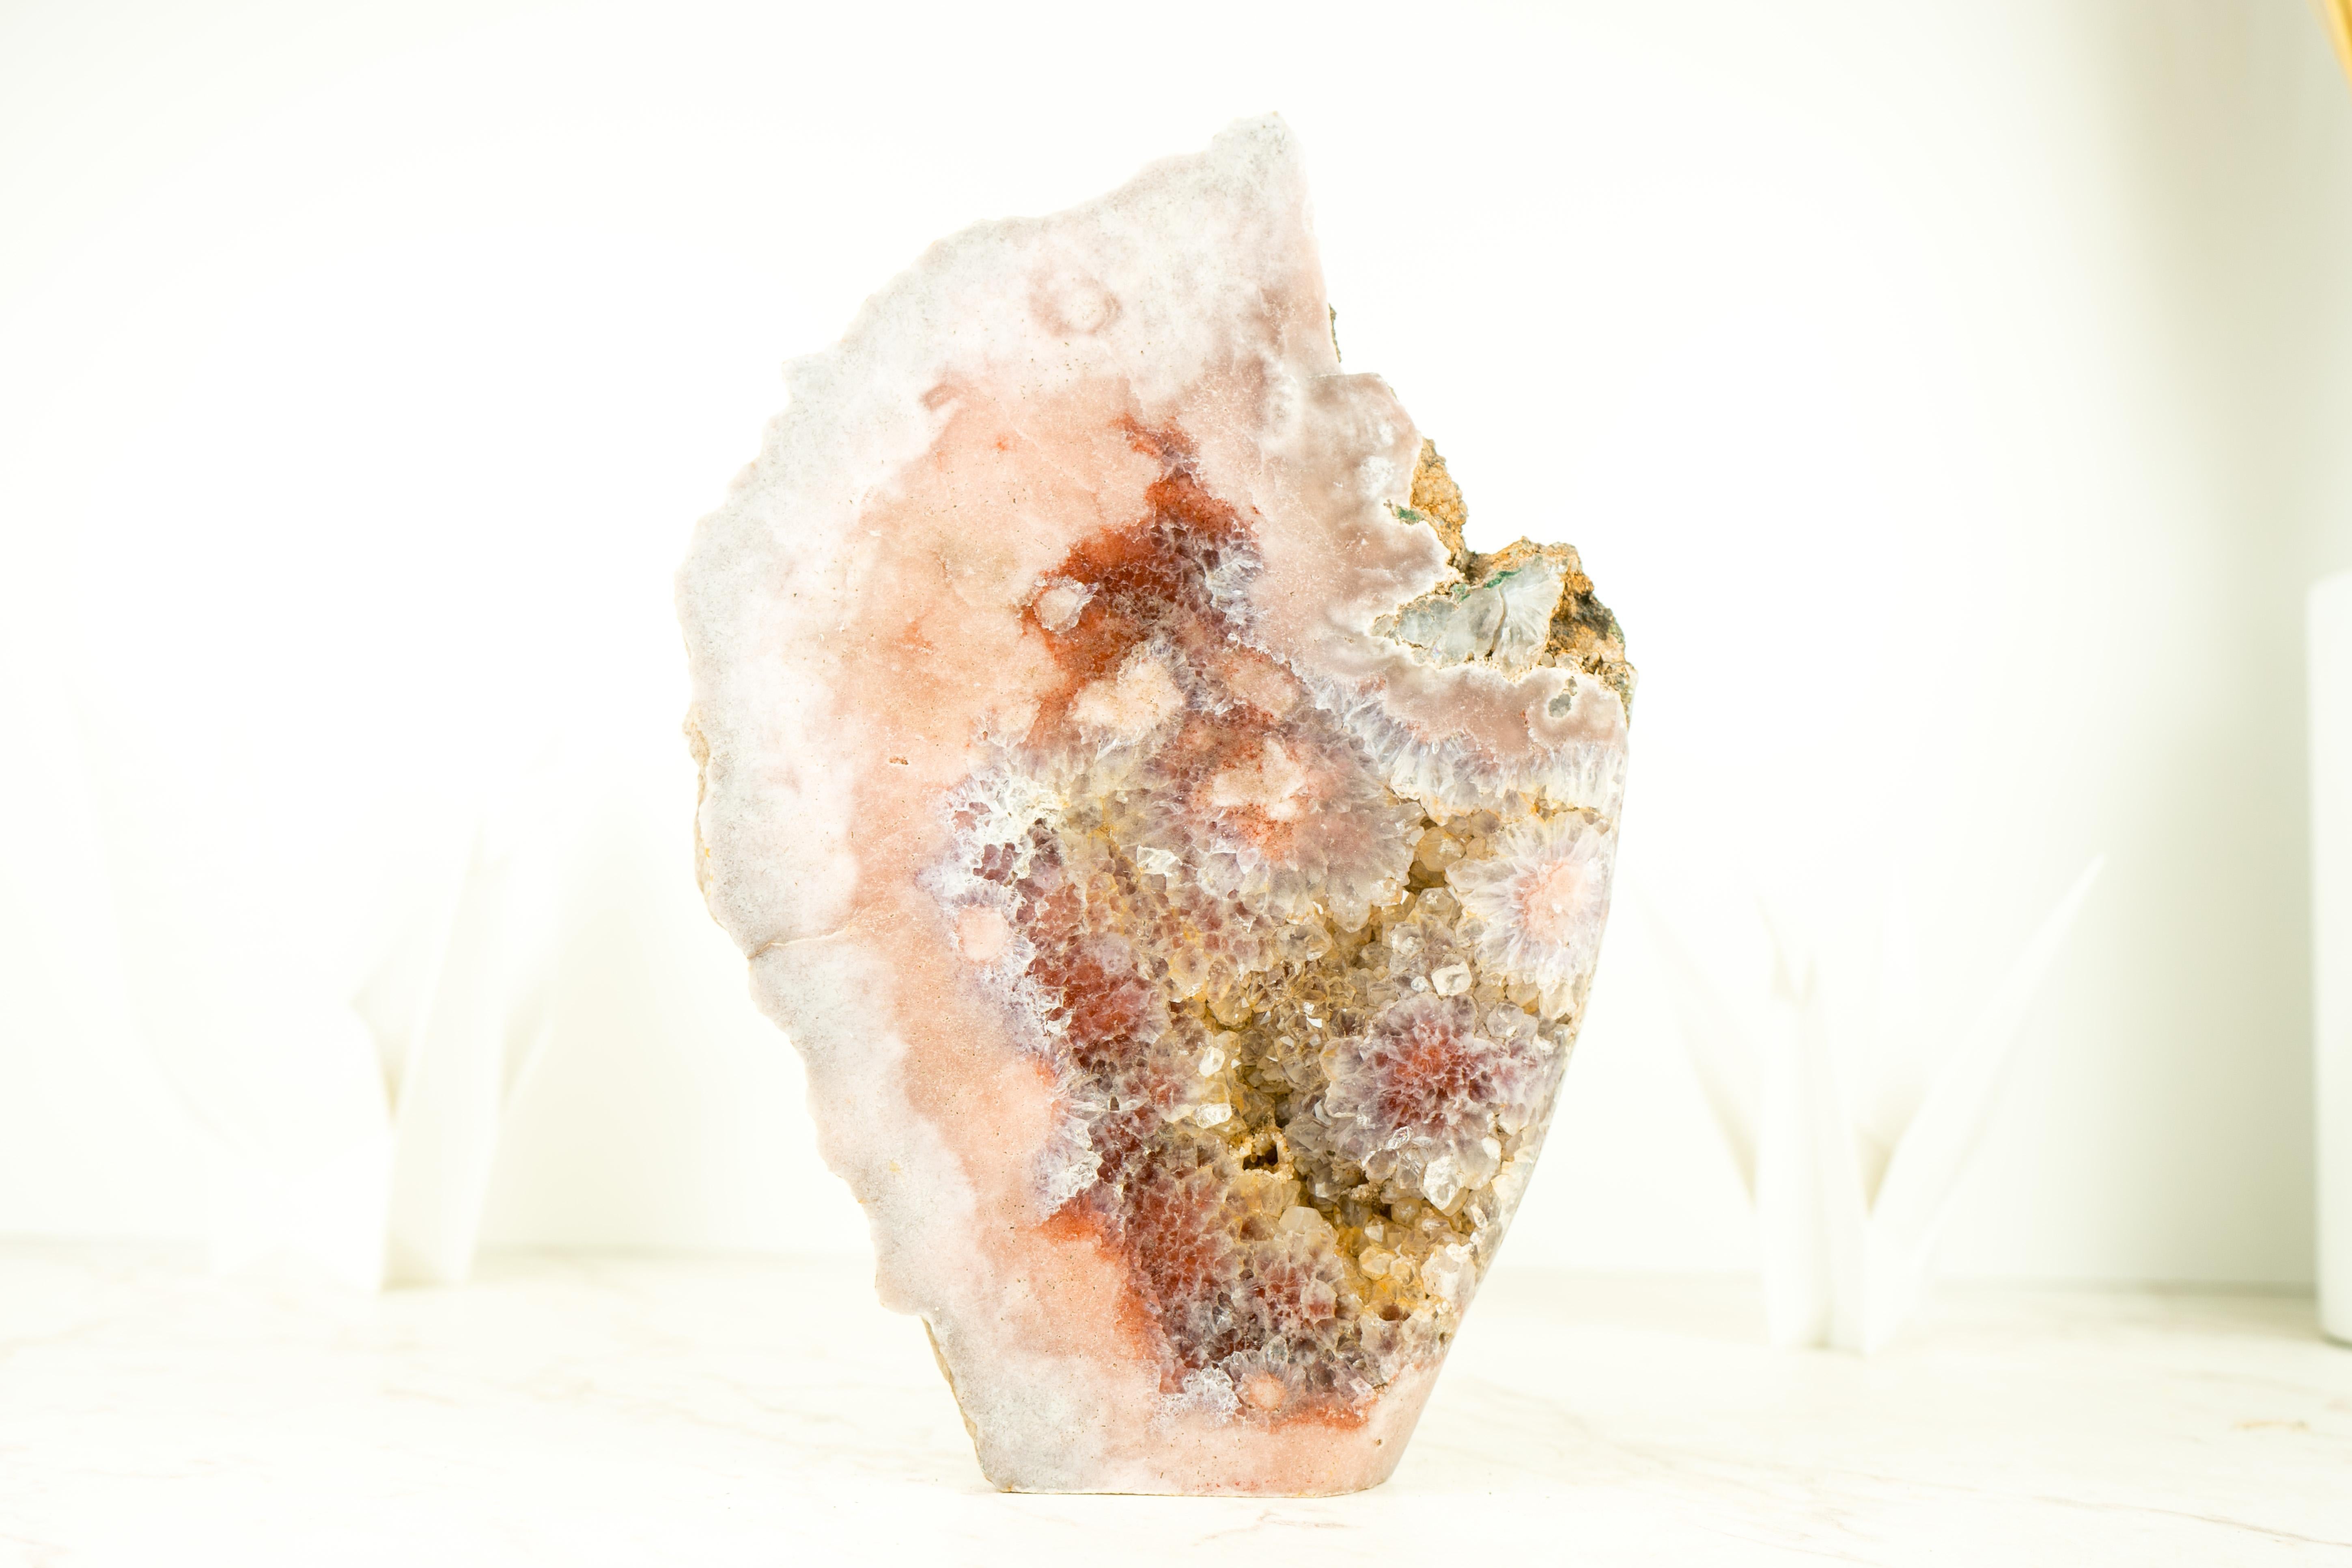 High-Grade Pink Amethyst Geode Slice with Sculptural Formation

▫️ Description

A Pink Amethyst Geode Slice showcases rare characteristics accentuated by its sculptural formation. With gorgeous aesthetics, this specimen is the perfect accent decor